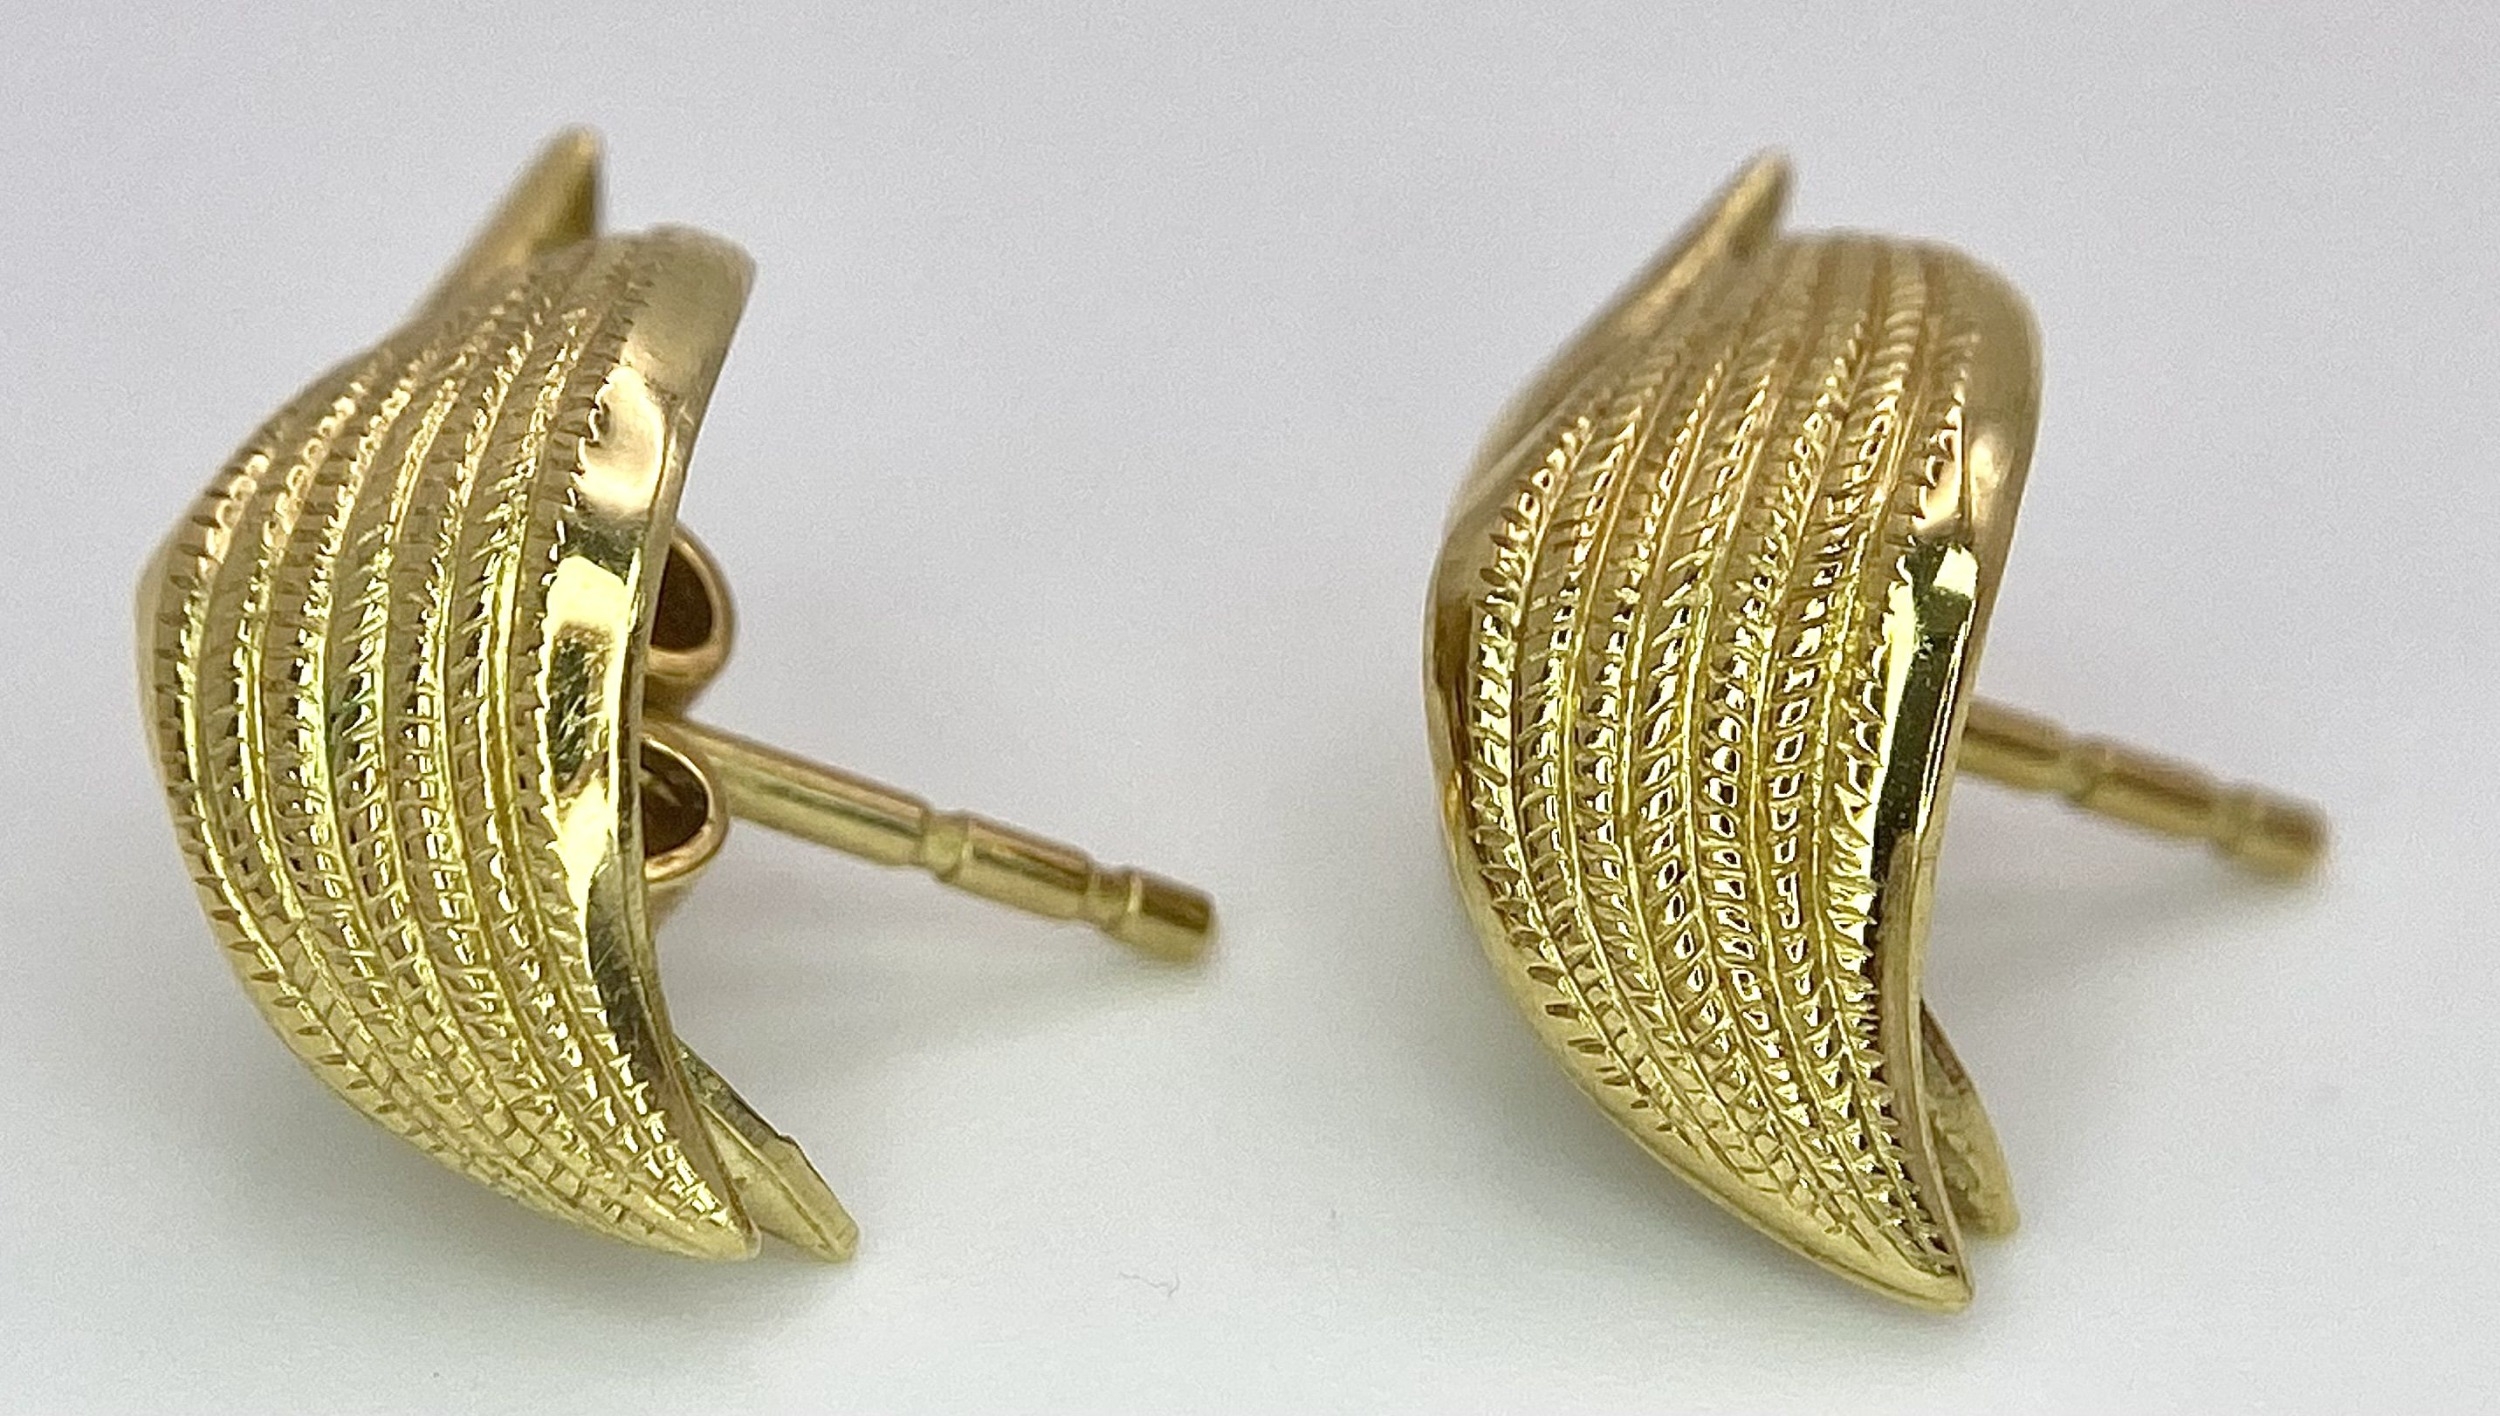 A Pair of 18K Yellow Gold Decorative Leaf Earrings. 3.2g - Image 3 of 7